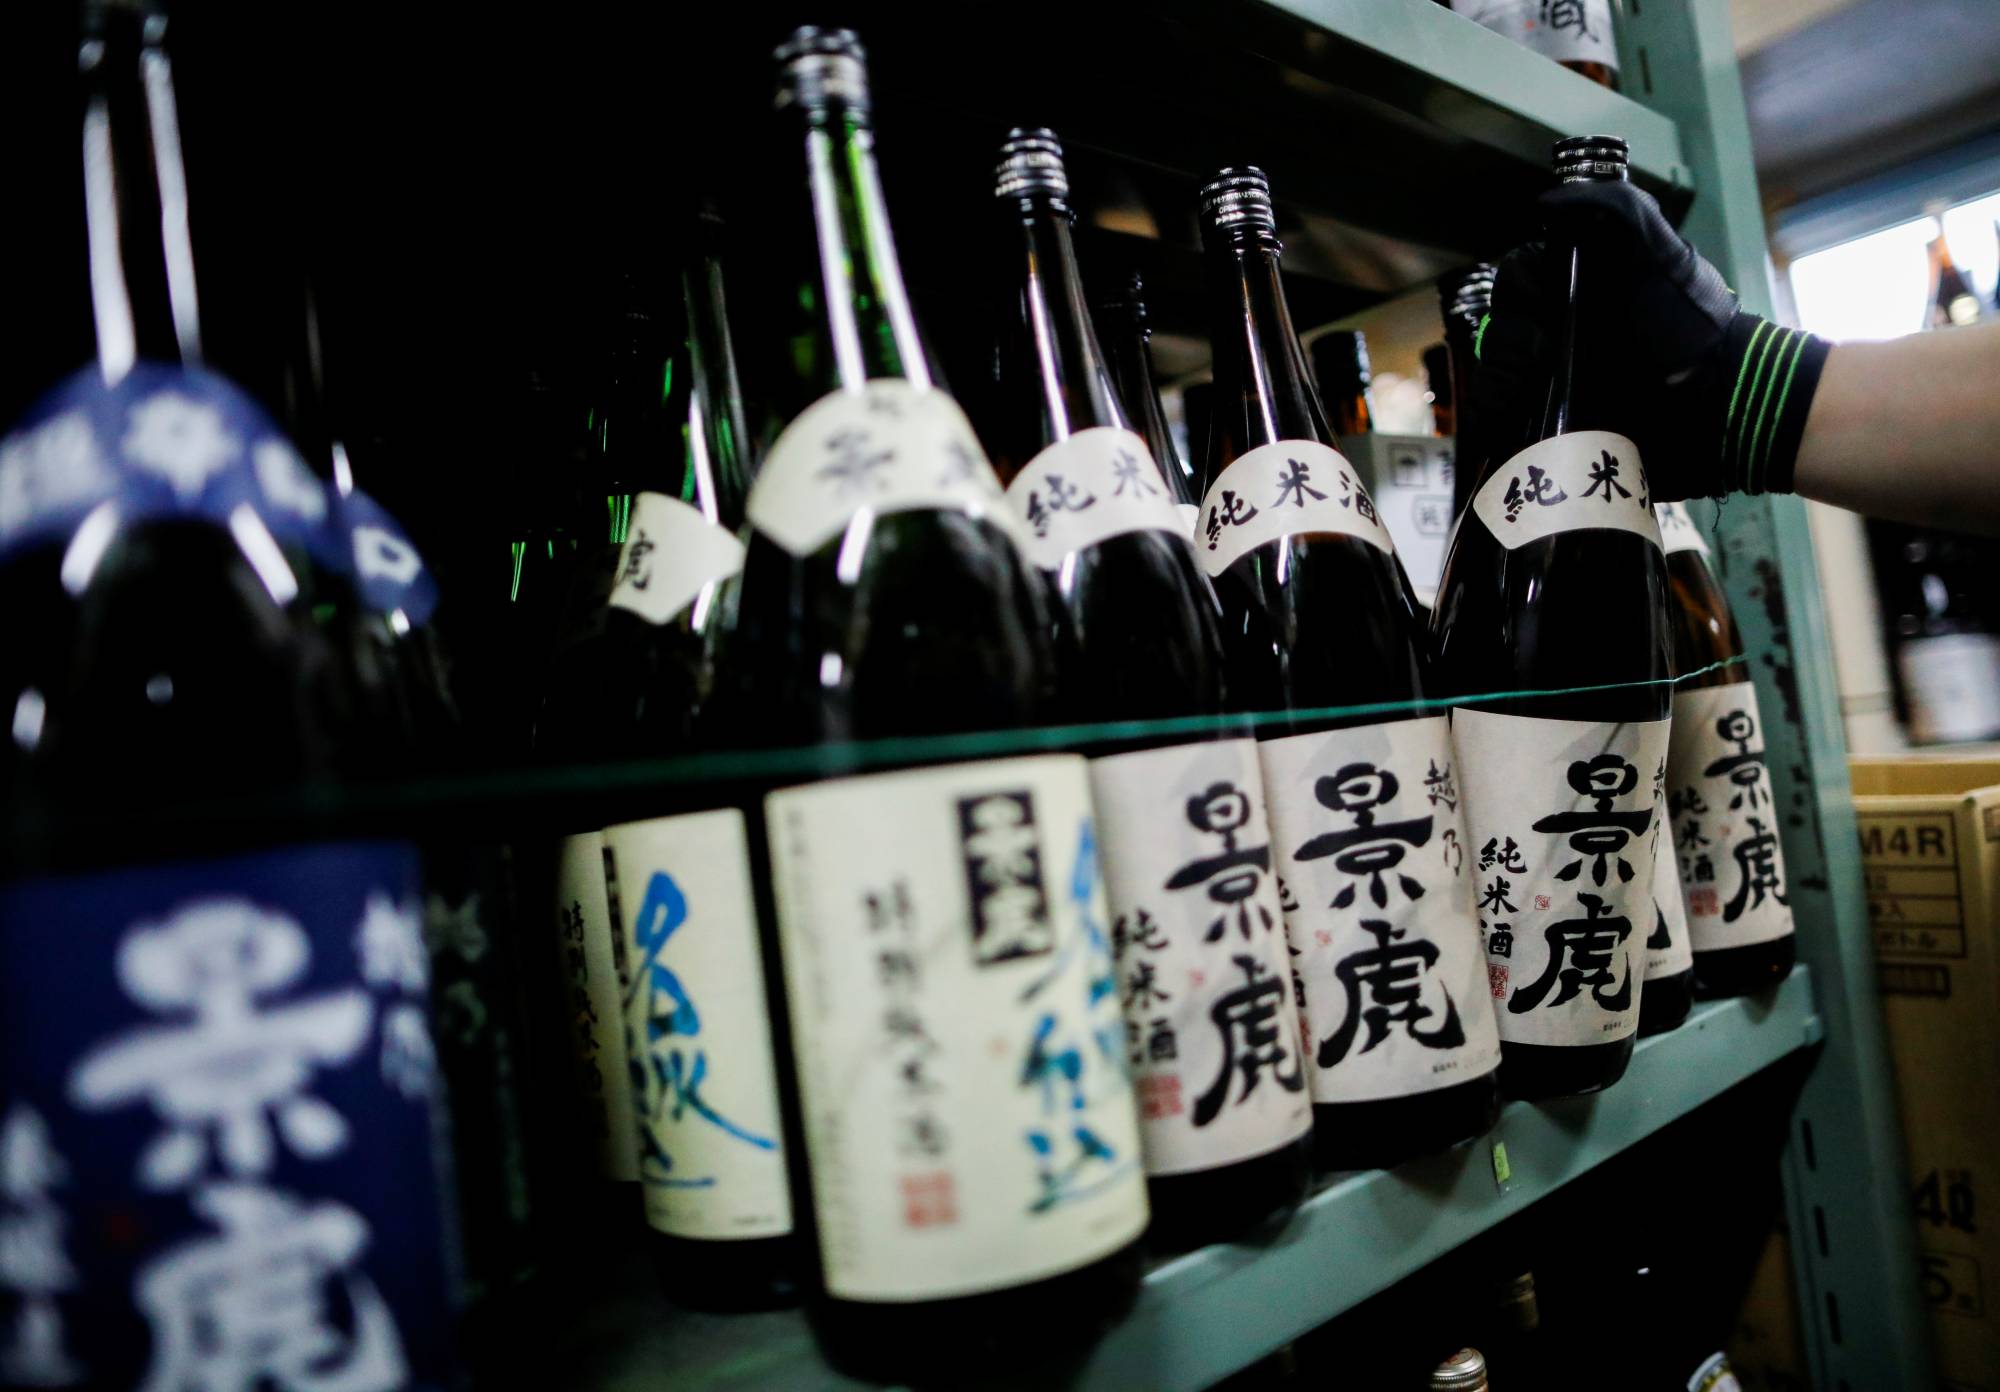 How two Arkansans are growing the sake industry in the state